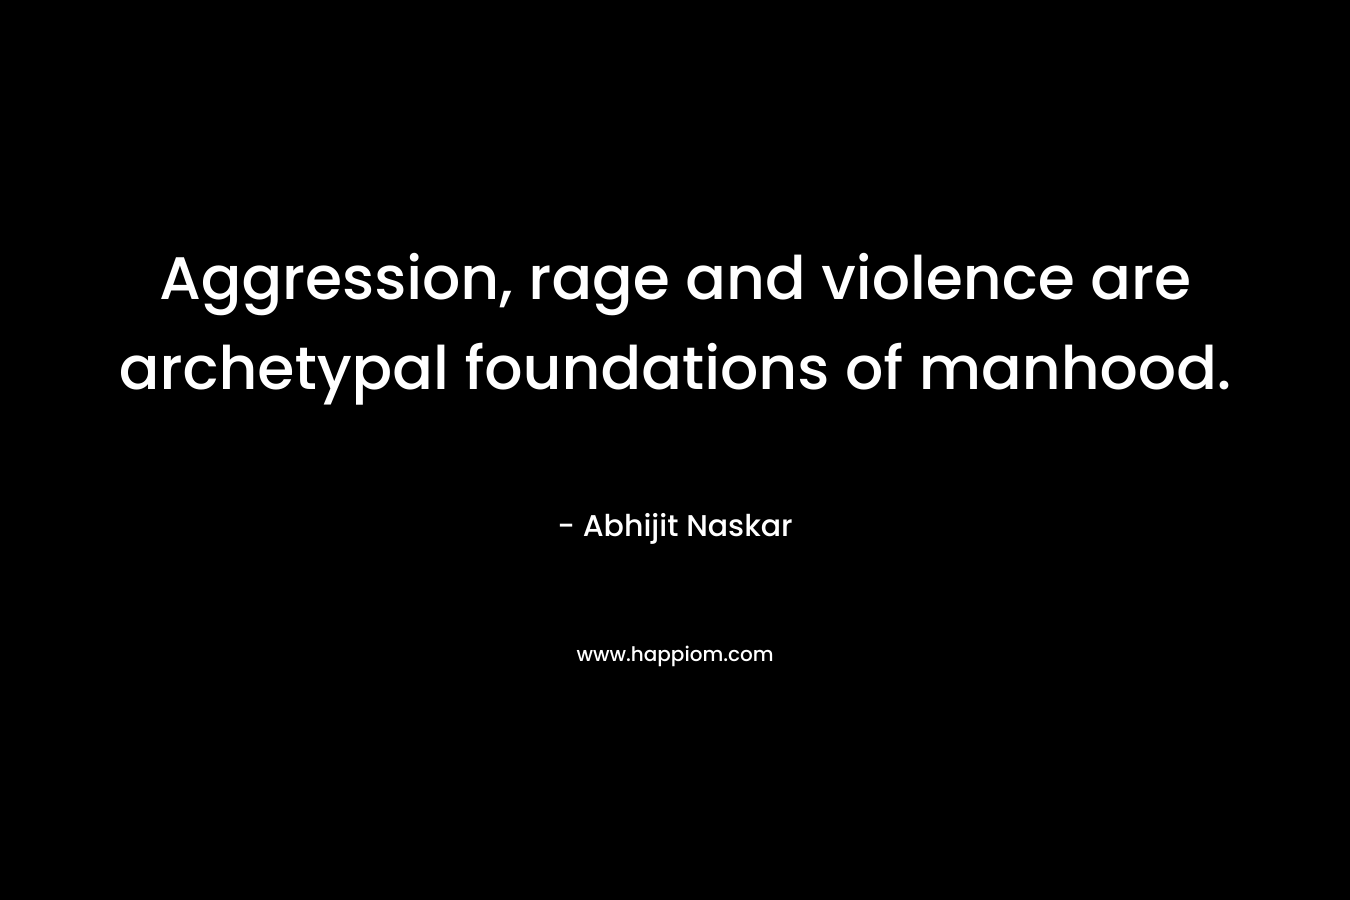 Aggression, rage and violence are archetypal foundations of manhood.